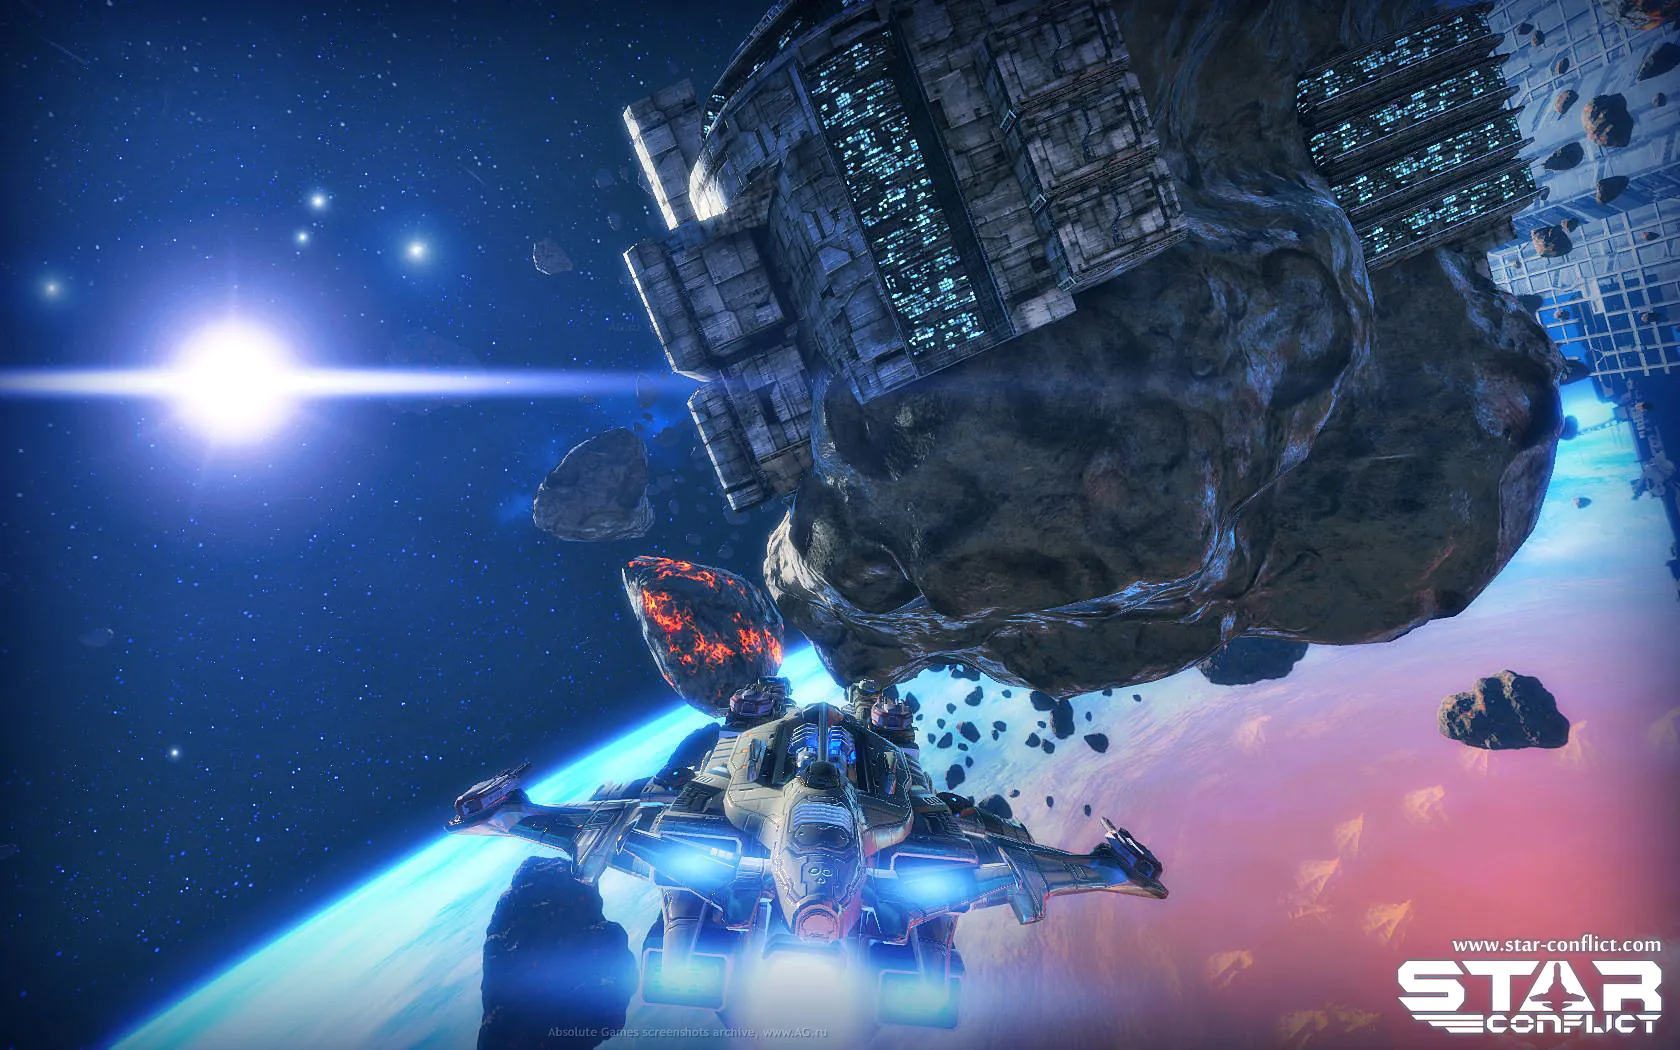 Star Conflict image 3